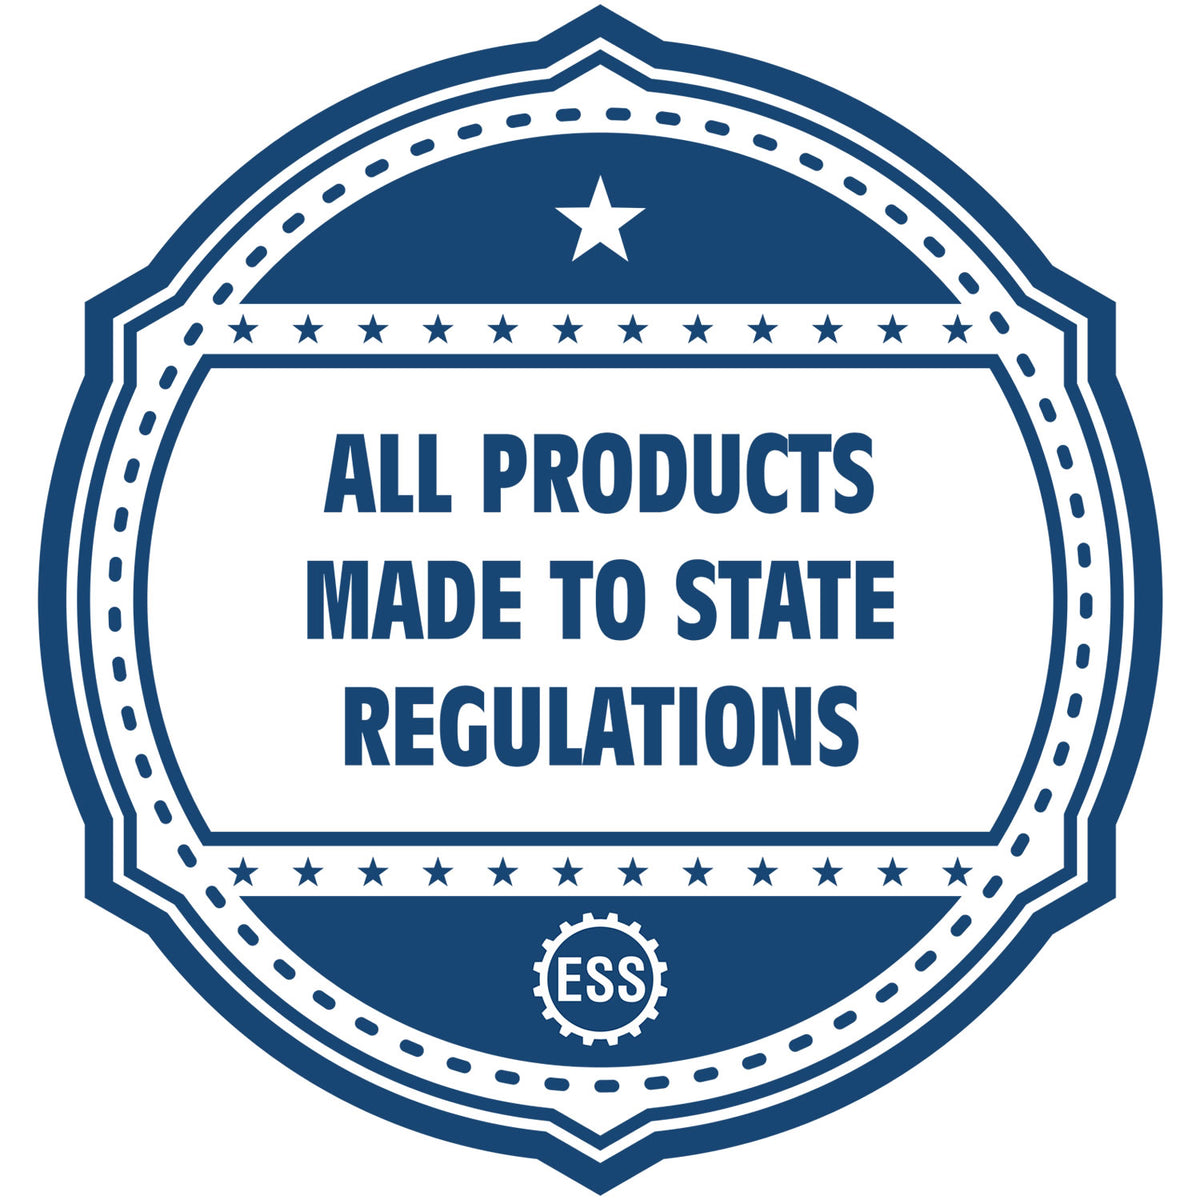 An icon or badge element for the State of Vermont Architectural Seal Embosser showing that this product is made in compliance with state regulations.